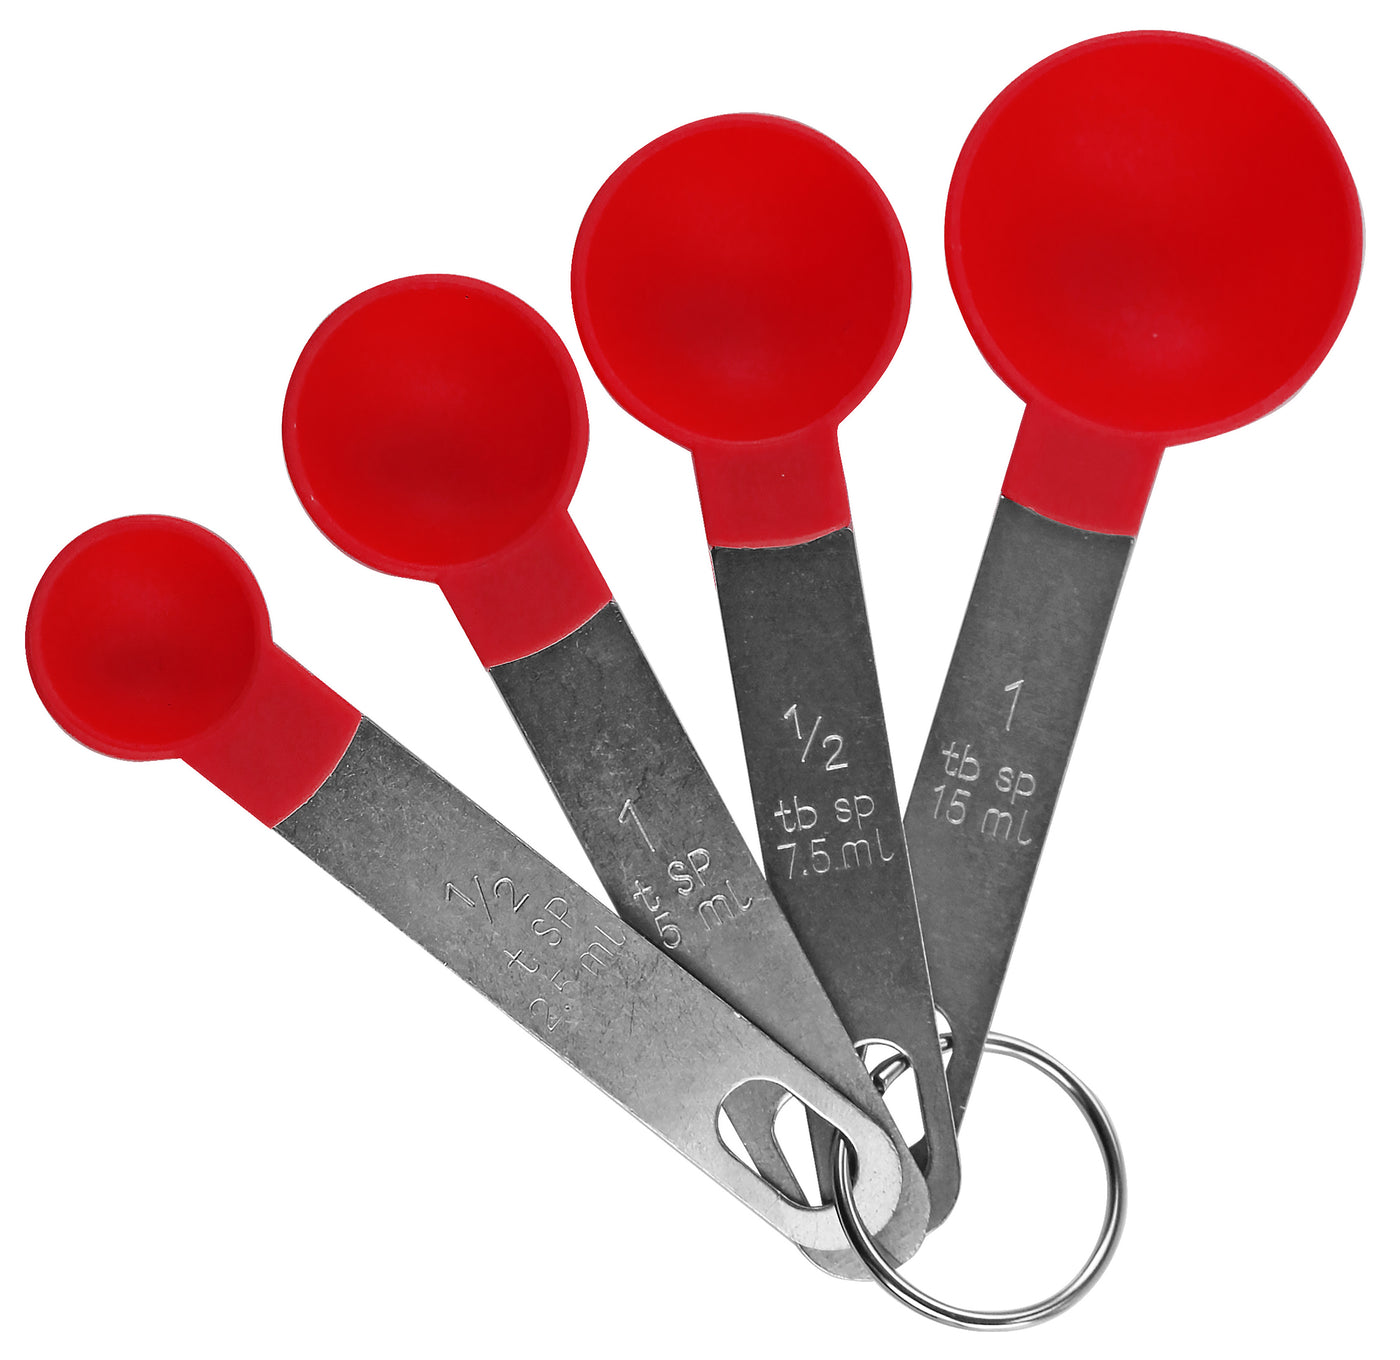 Measuring Cups and Spoon Set of 15